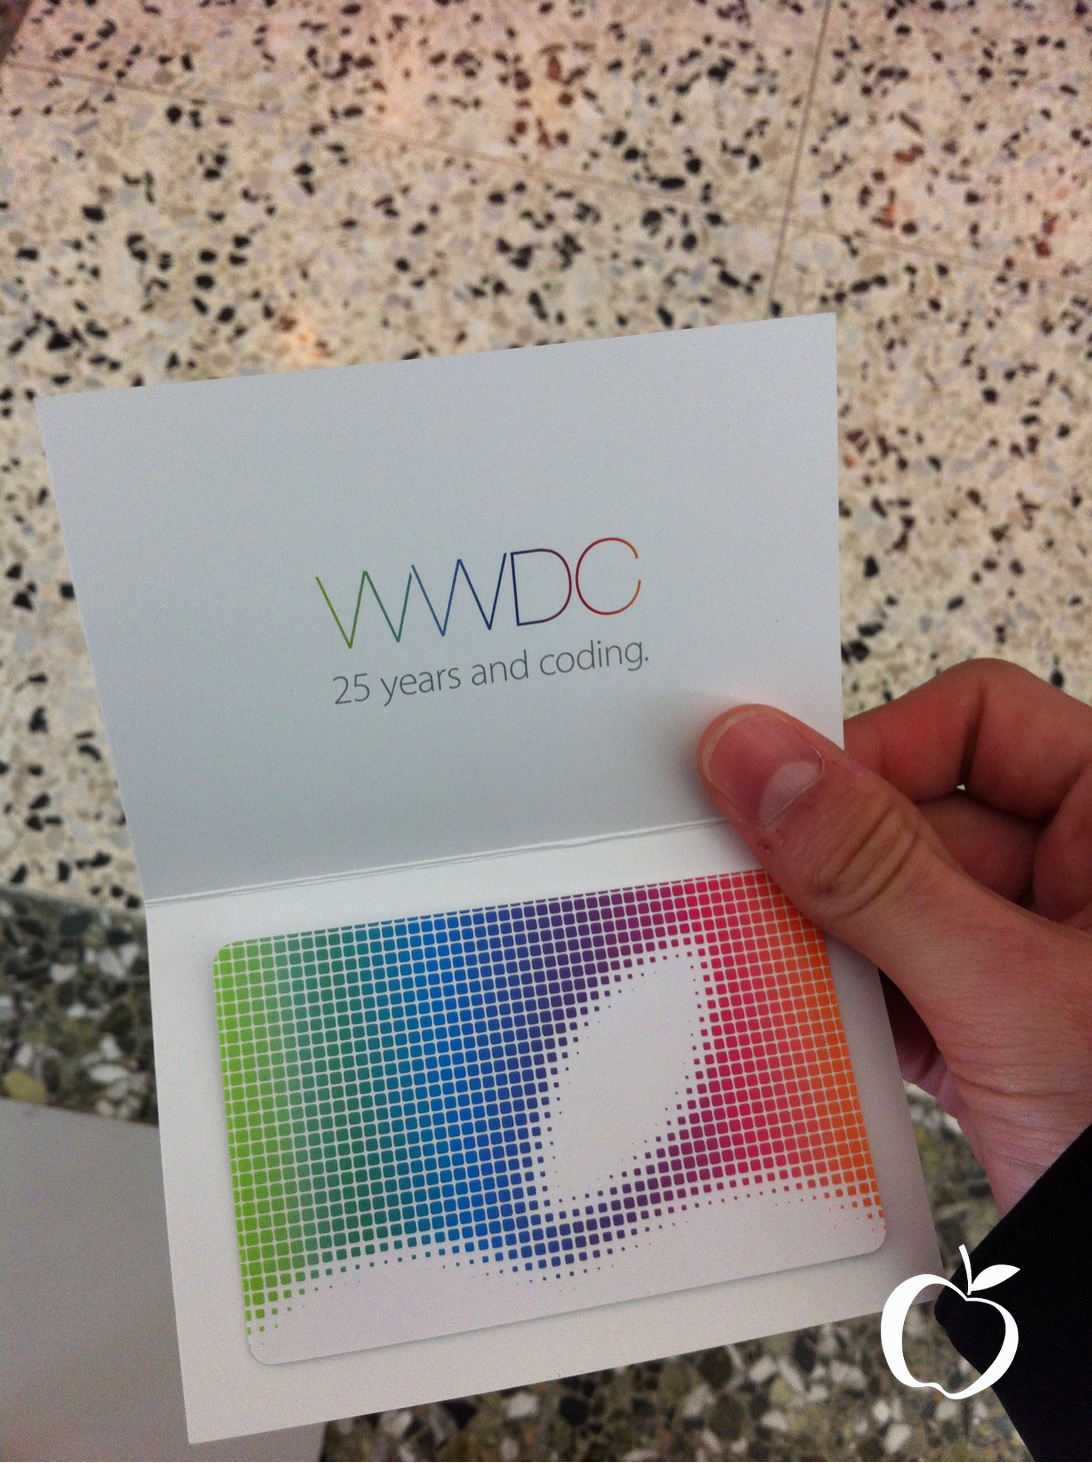 Apple Gives WWDC Attendees Jackets and $25 Gift Cards